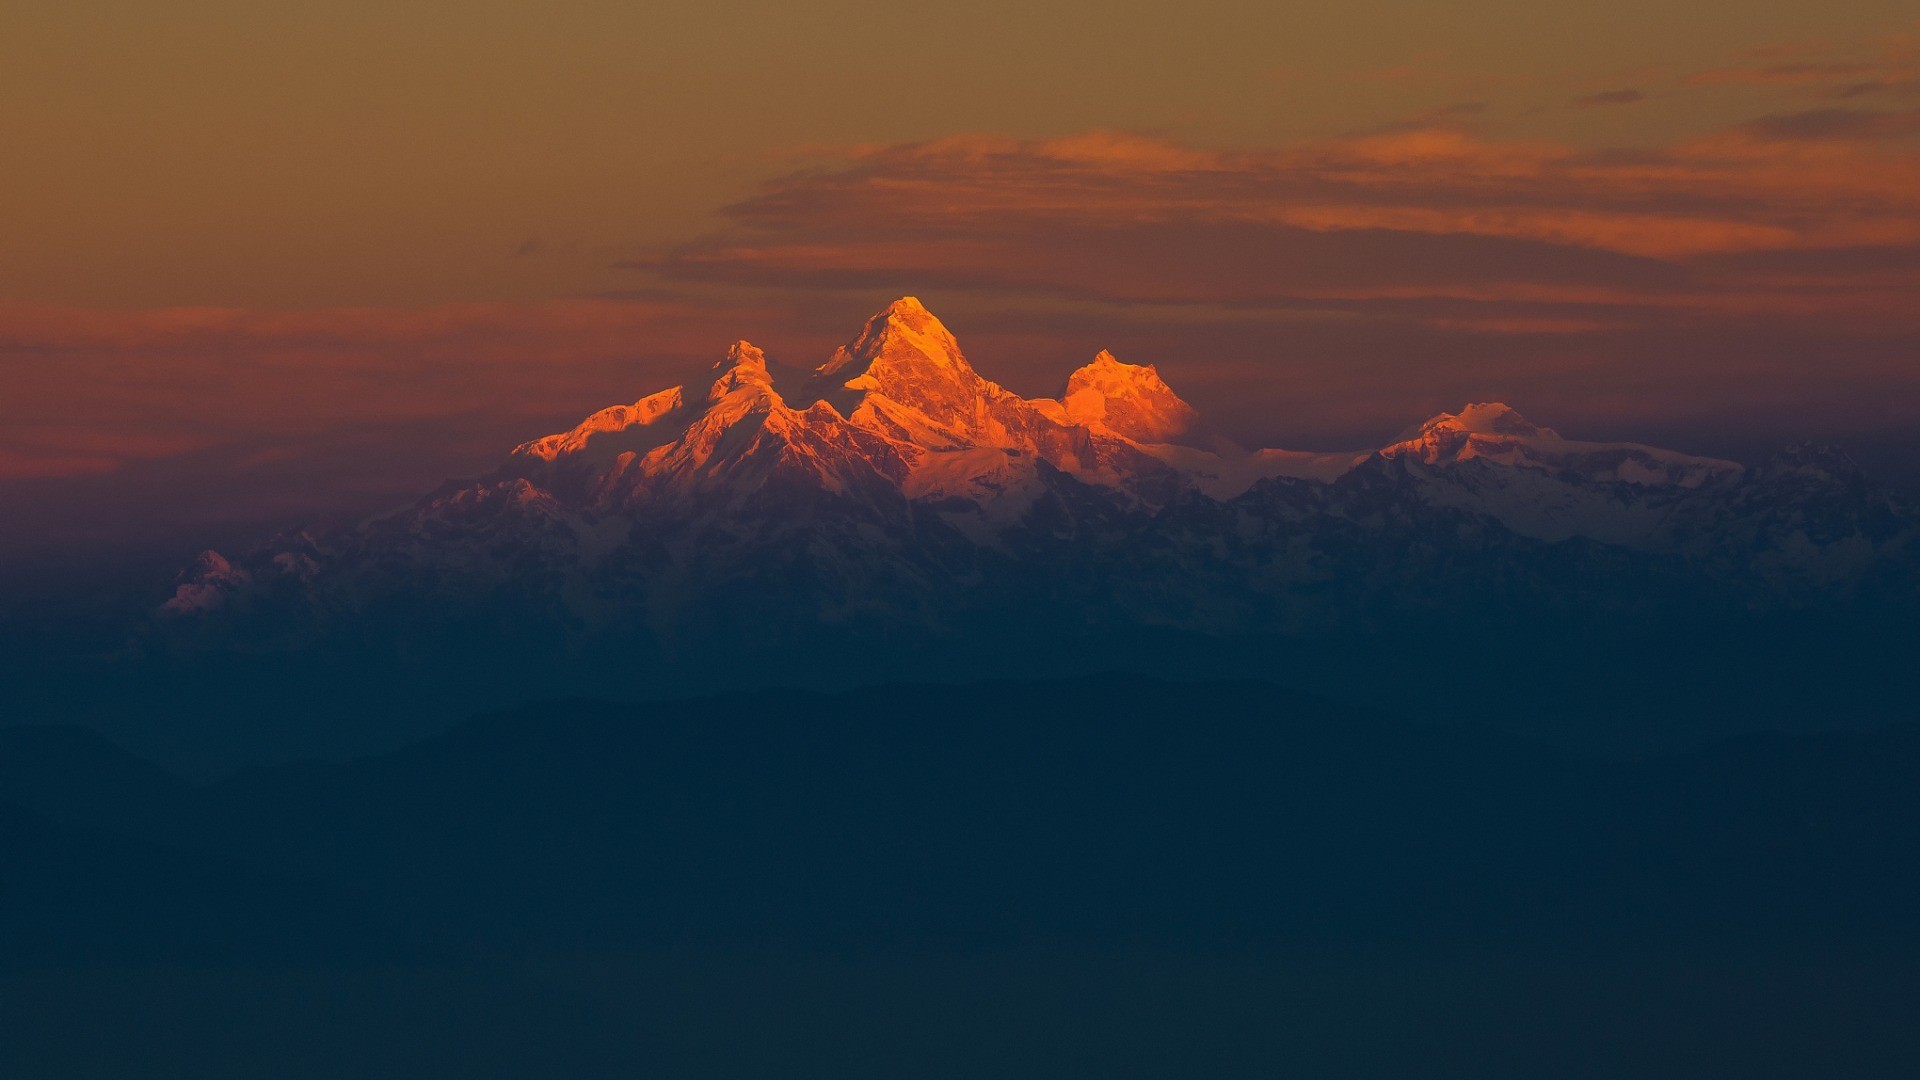 General 1920x1080 nature landscape sky clouds Himalayas mountains sunset hills silhouette snowy peak minimalism filter